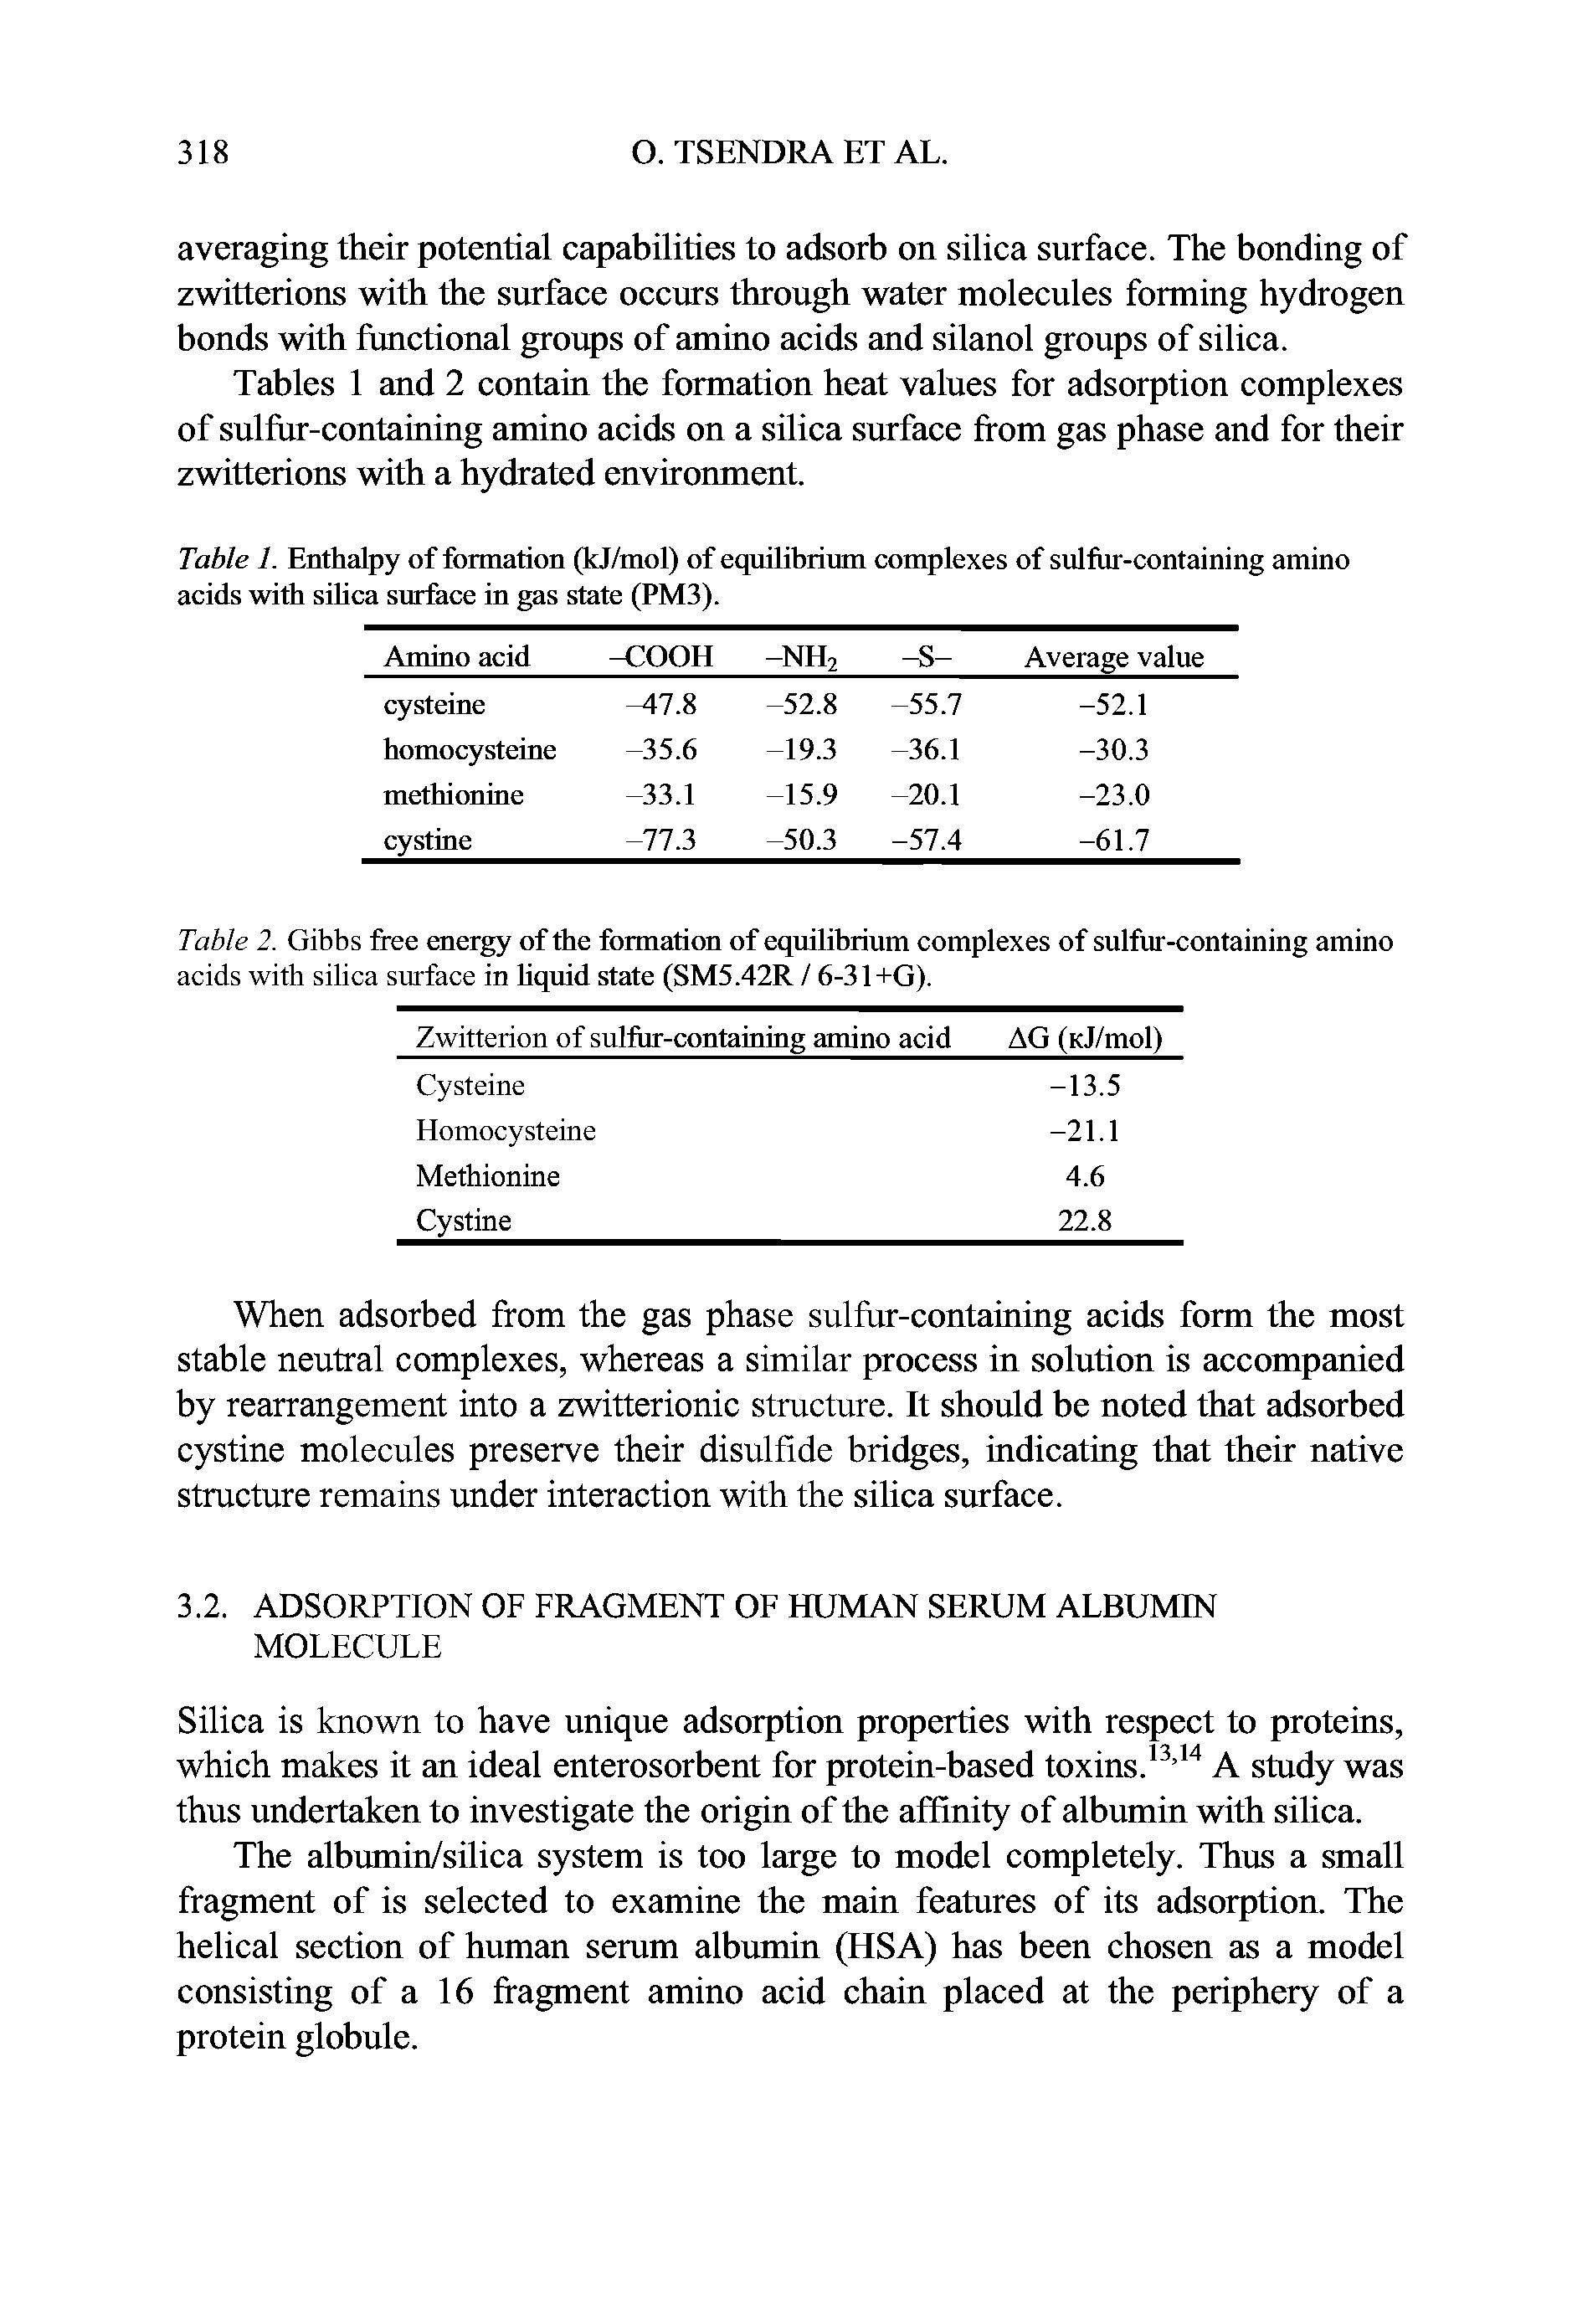 Table 2. Gibbs free energy of the formation of equilibrium complexes of sulfur-containing amino acids with silica surface in hquid state (SM5.42R / 6-31+G).